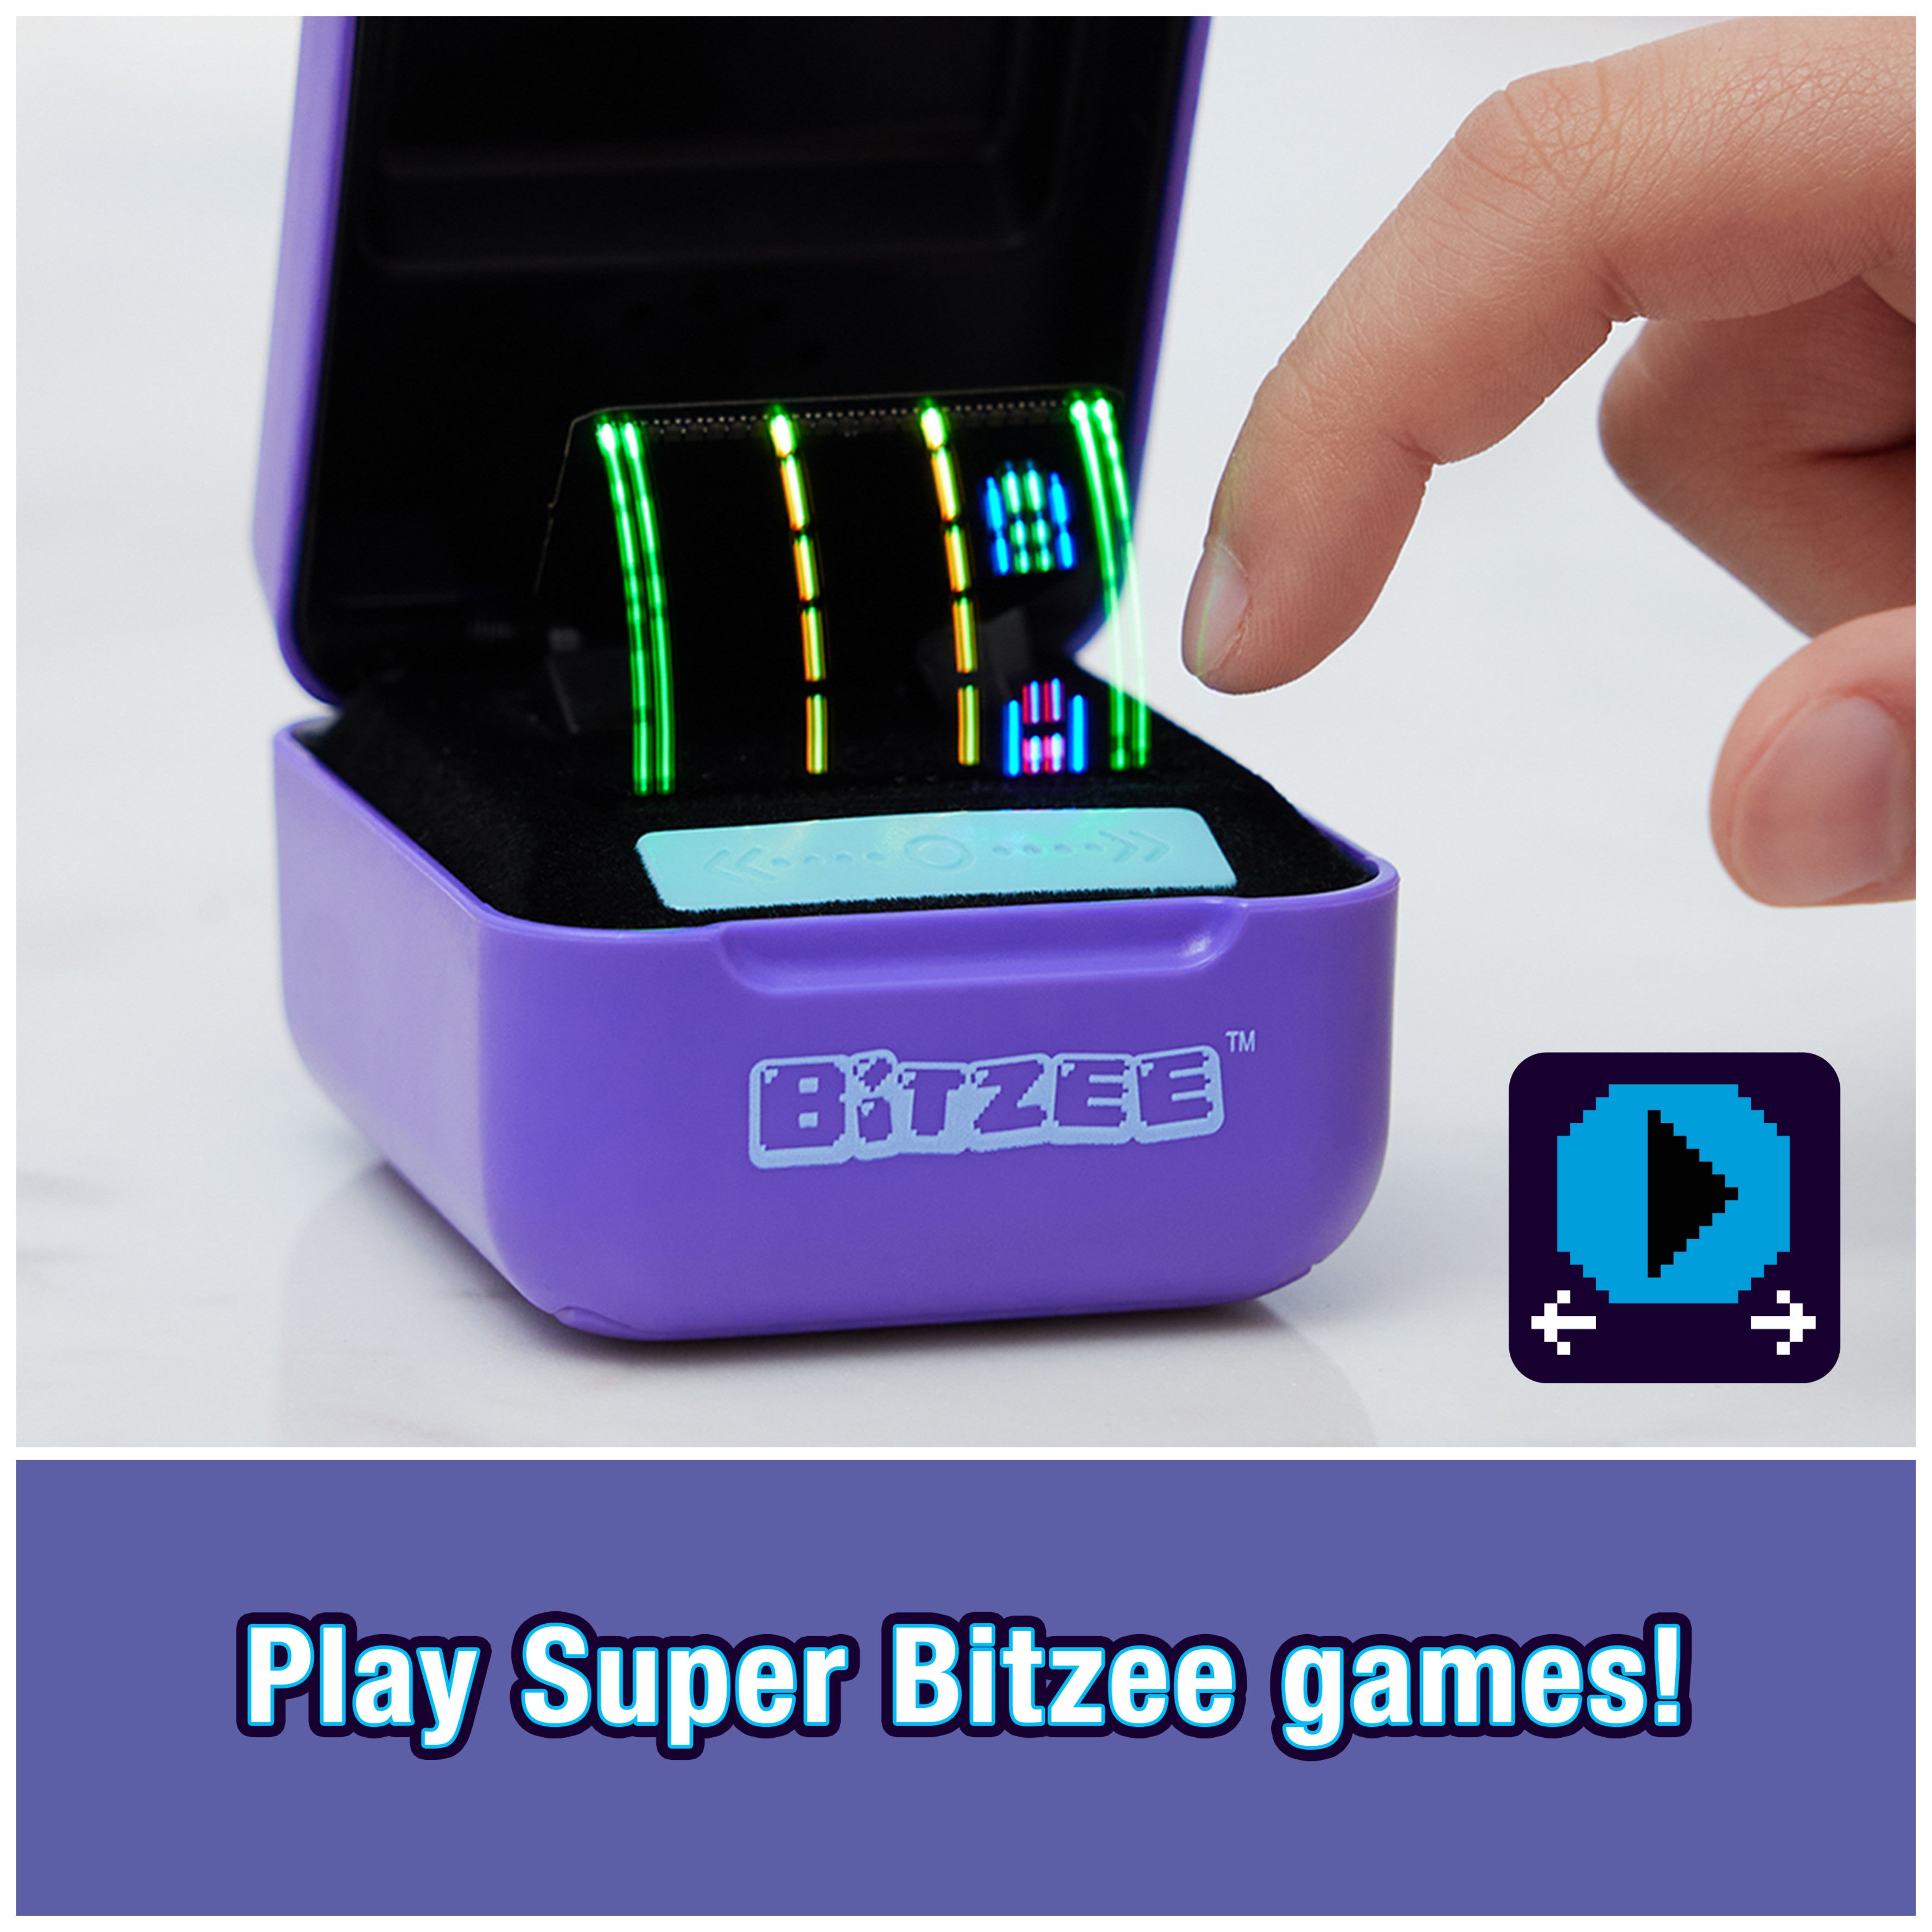 Bitzee, Interactive Digital Pet and Case with 15 Electronic Pets Inside, Reacts to Touch | MTTS167